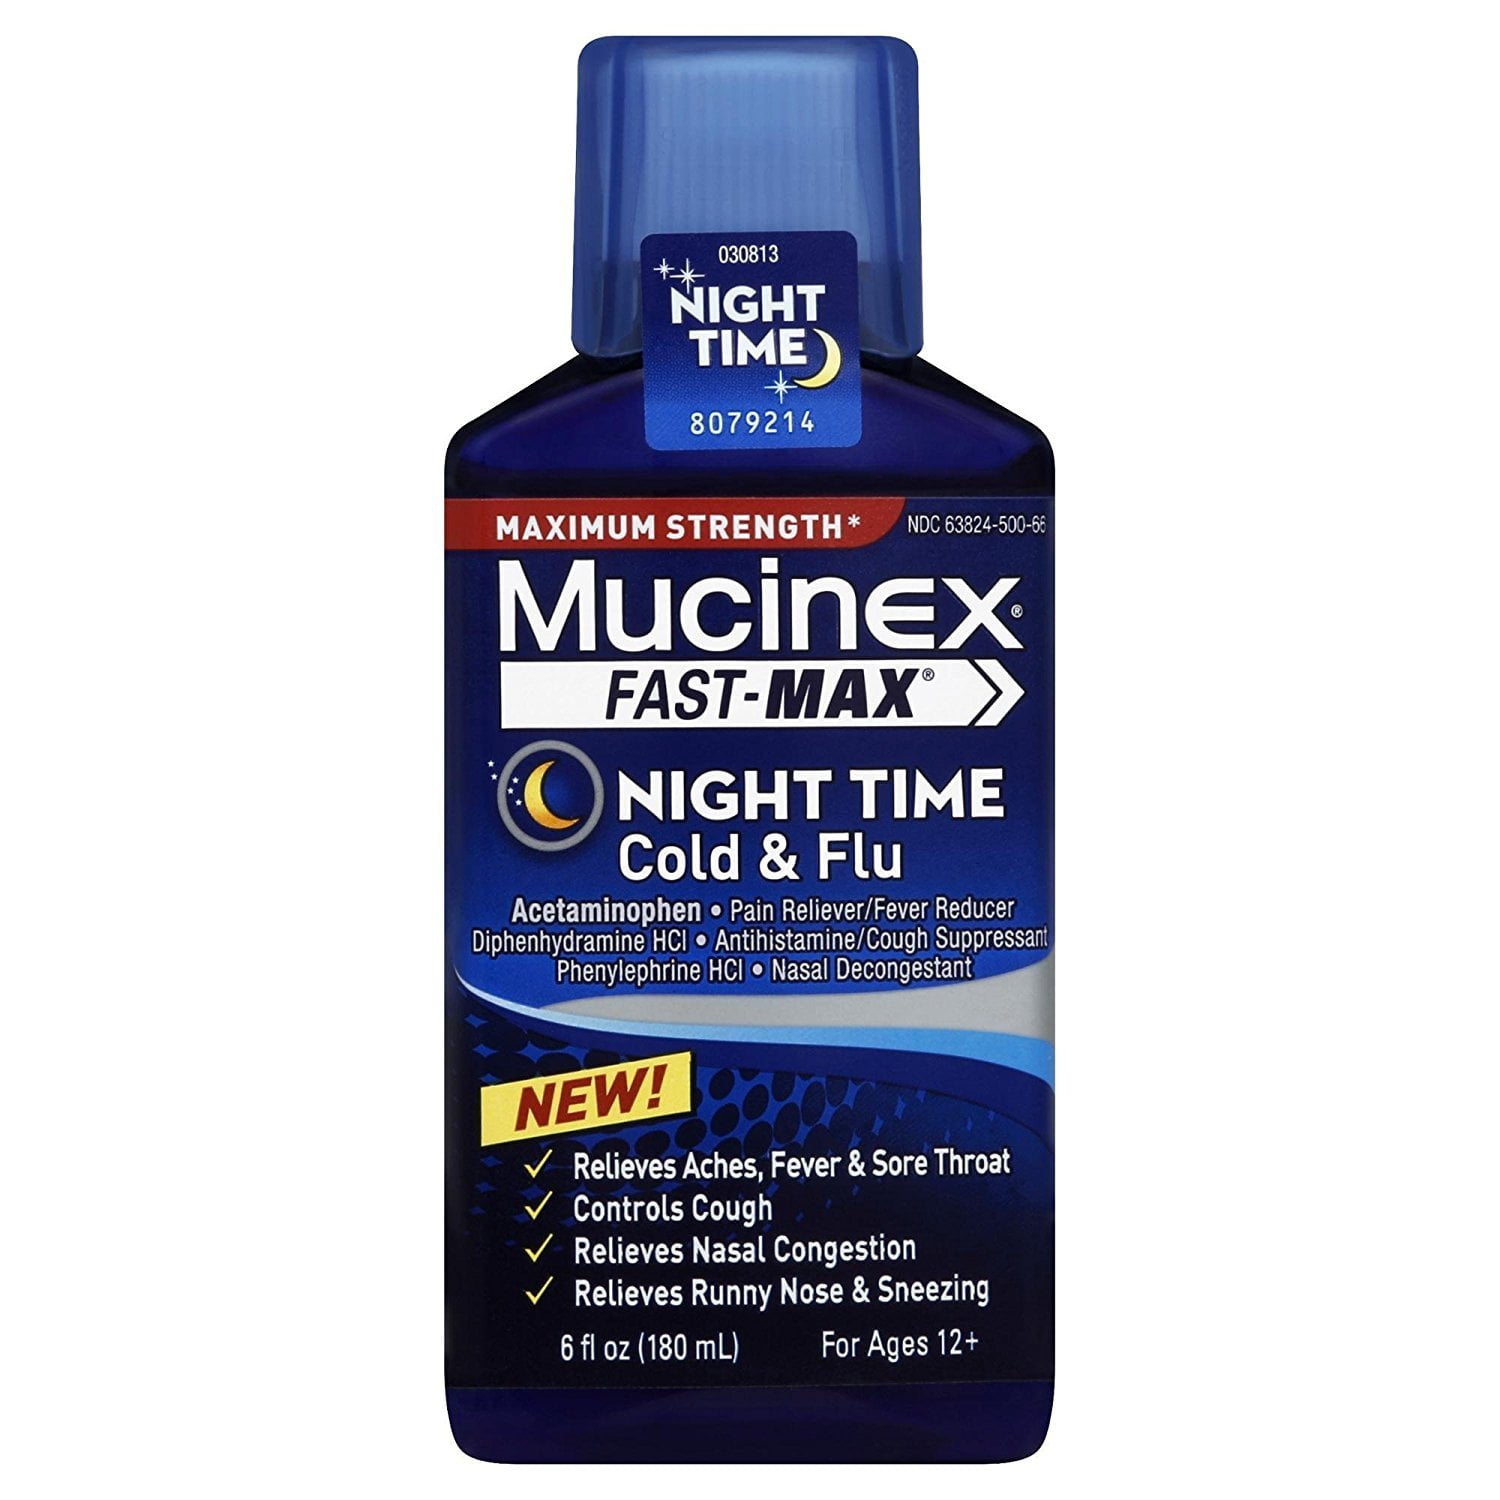 can i take other cold medicine with mucinex